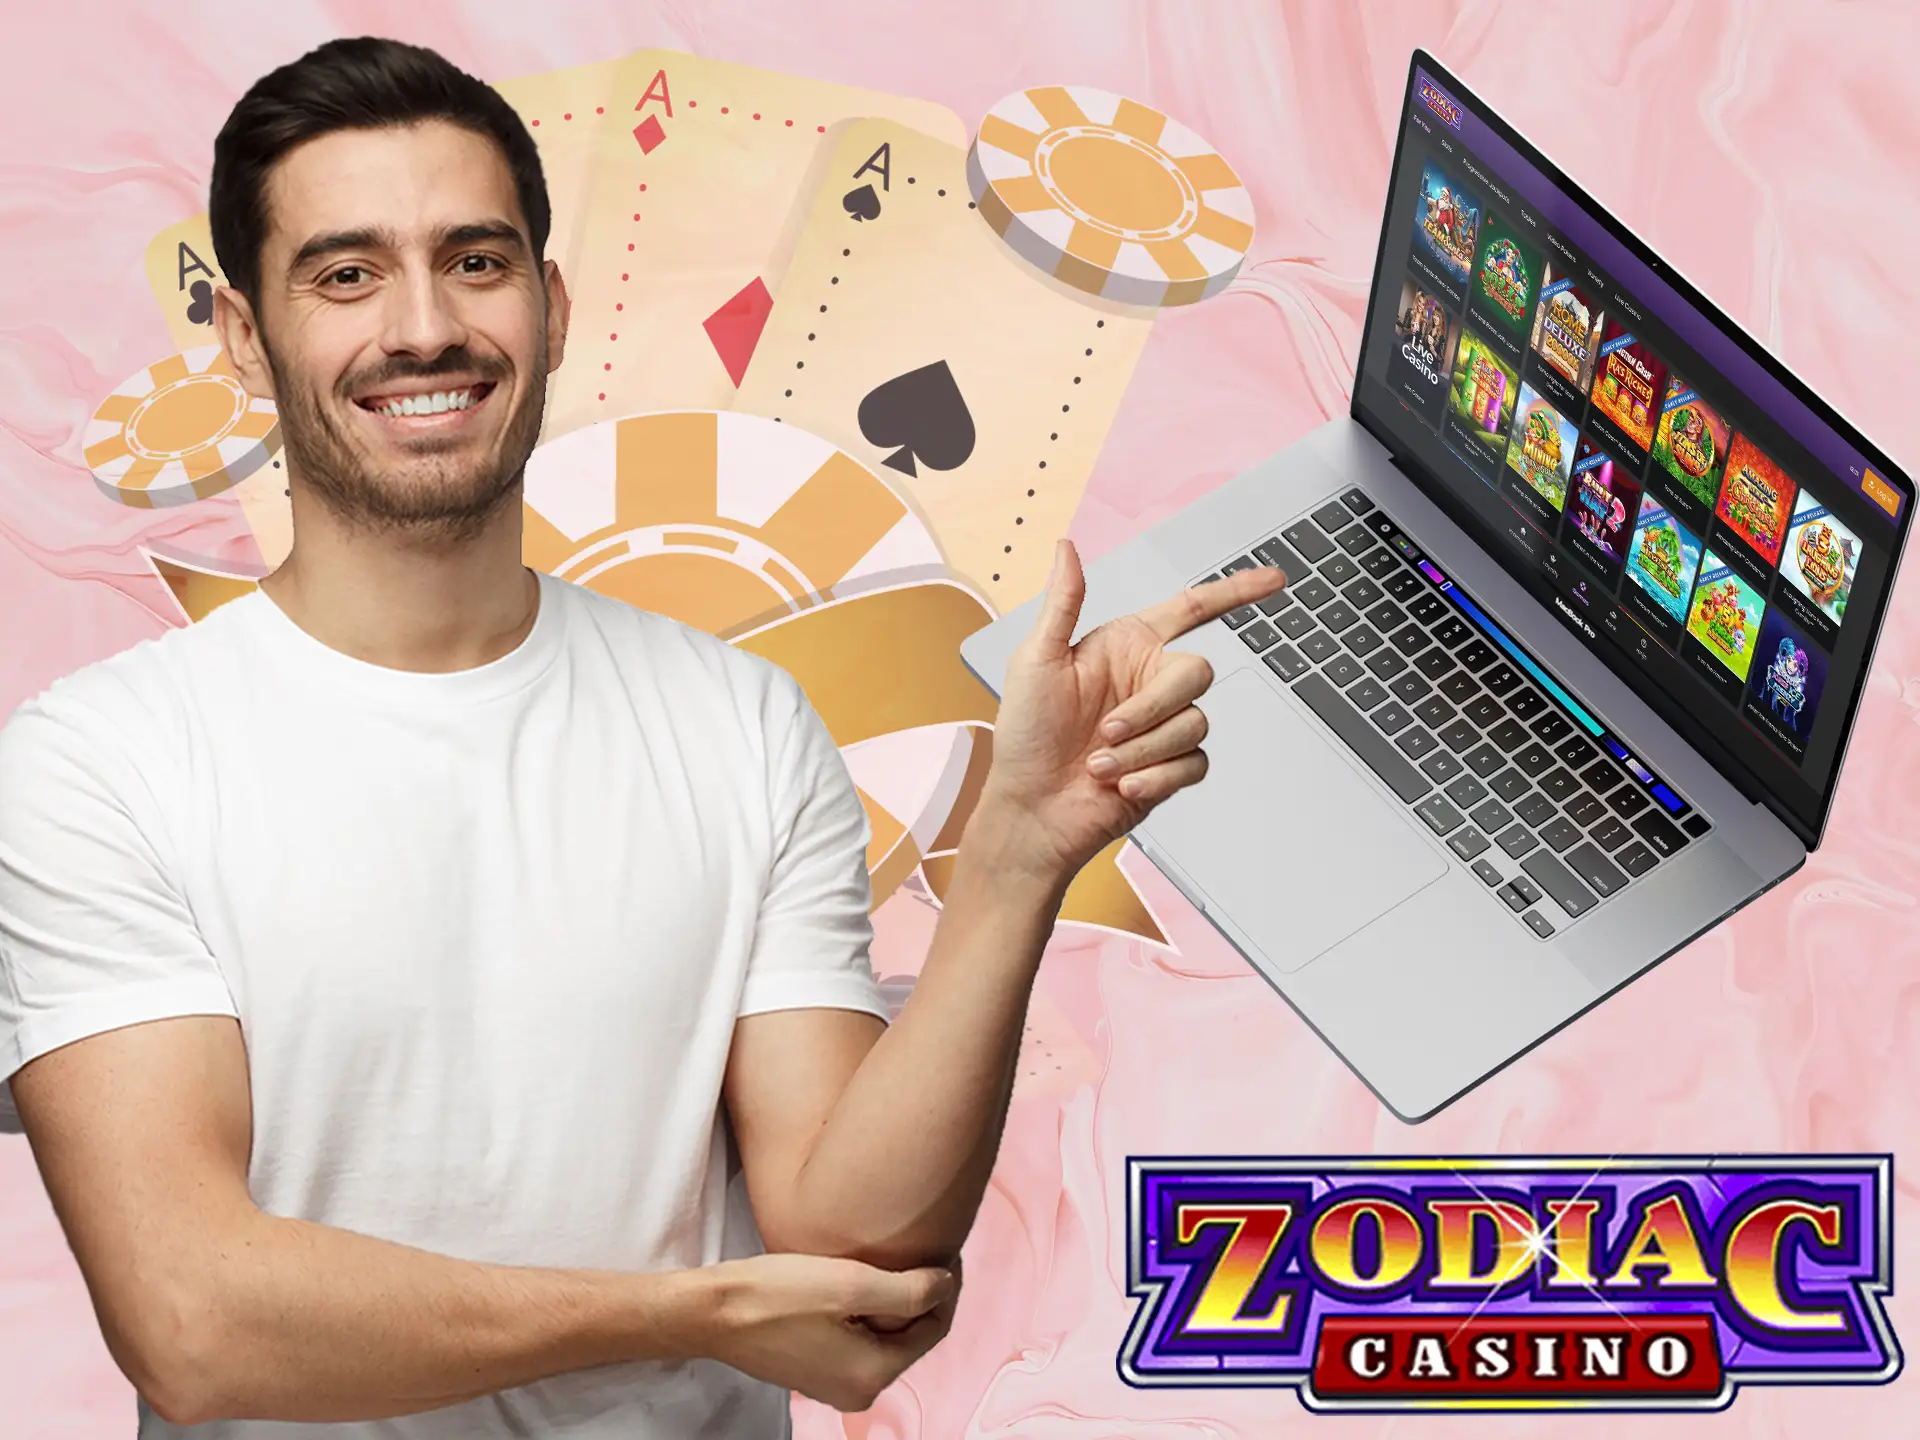 Bangladesh players have the chance to dive into the world of betting with their smartphone, thanks to the fast and secure Zodiac Casino.